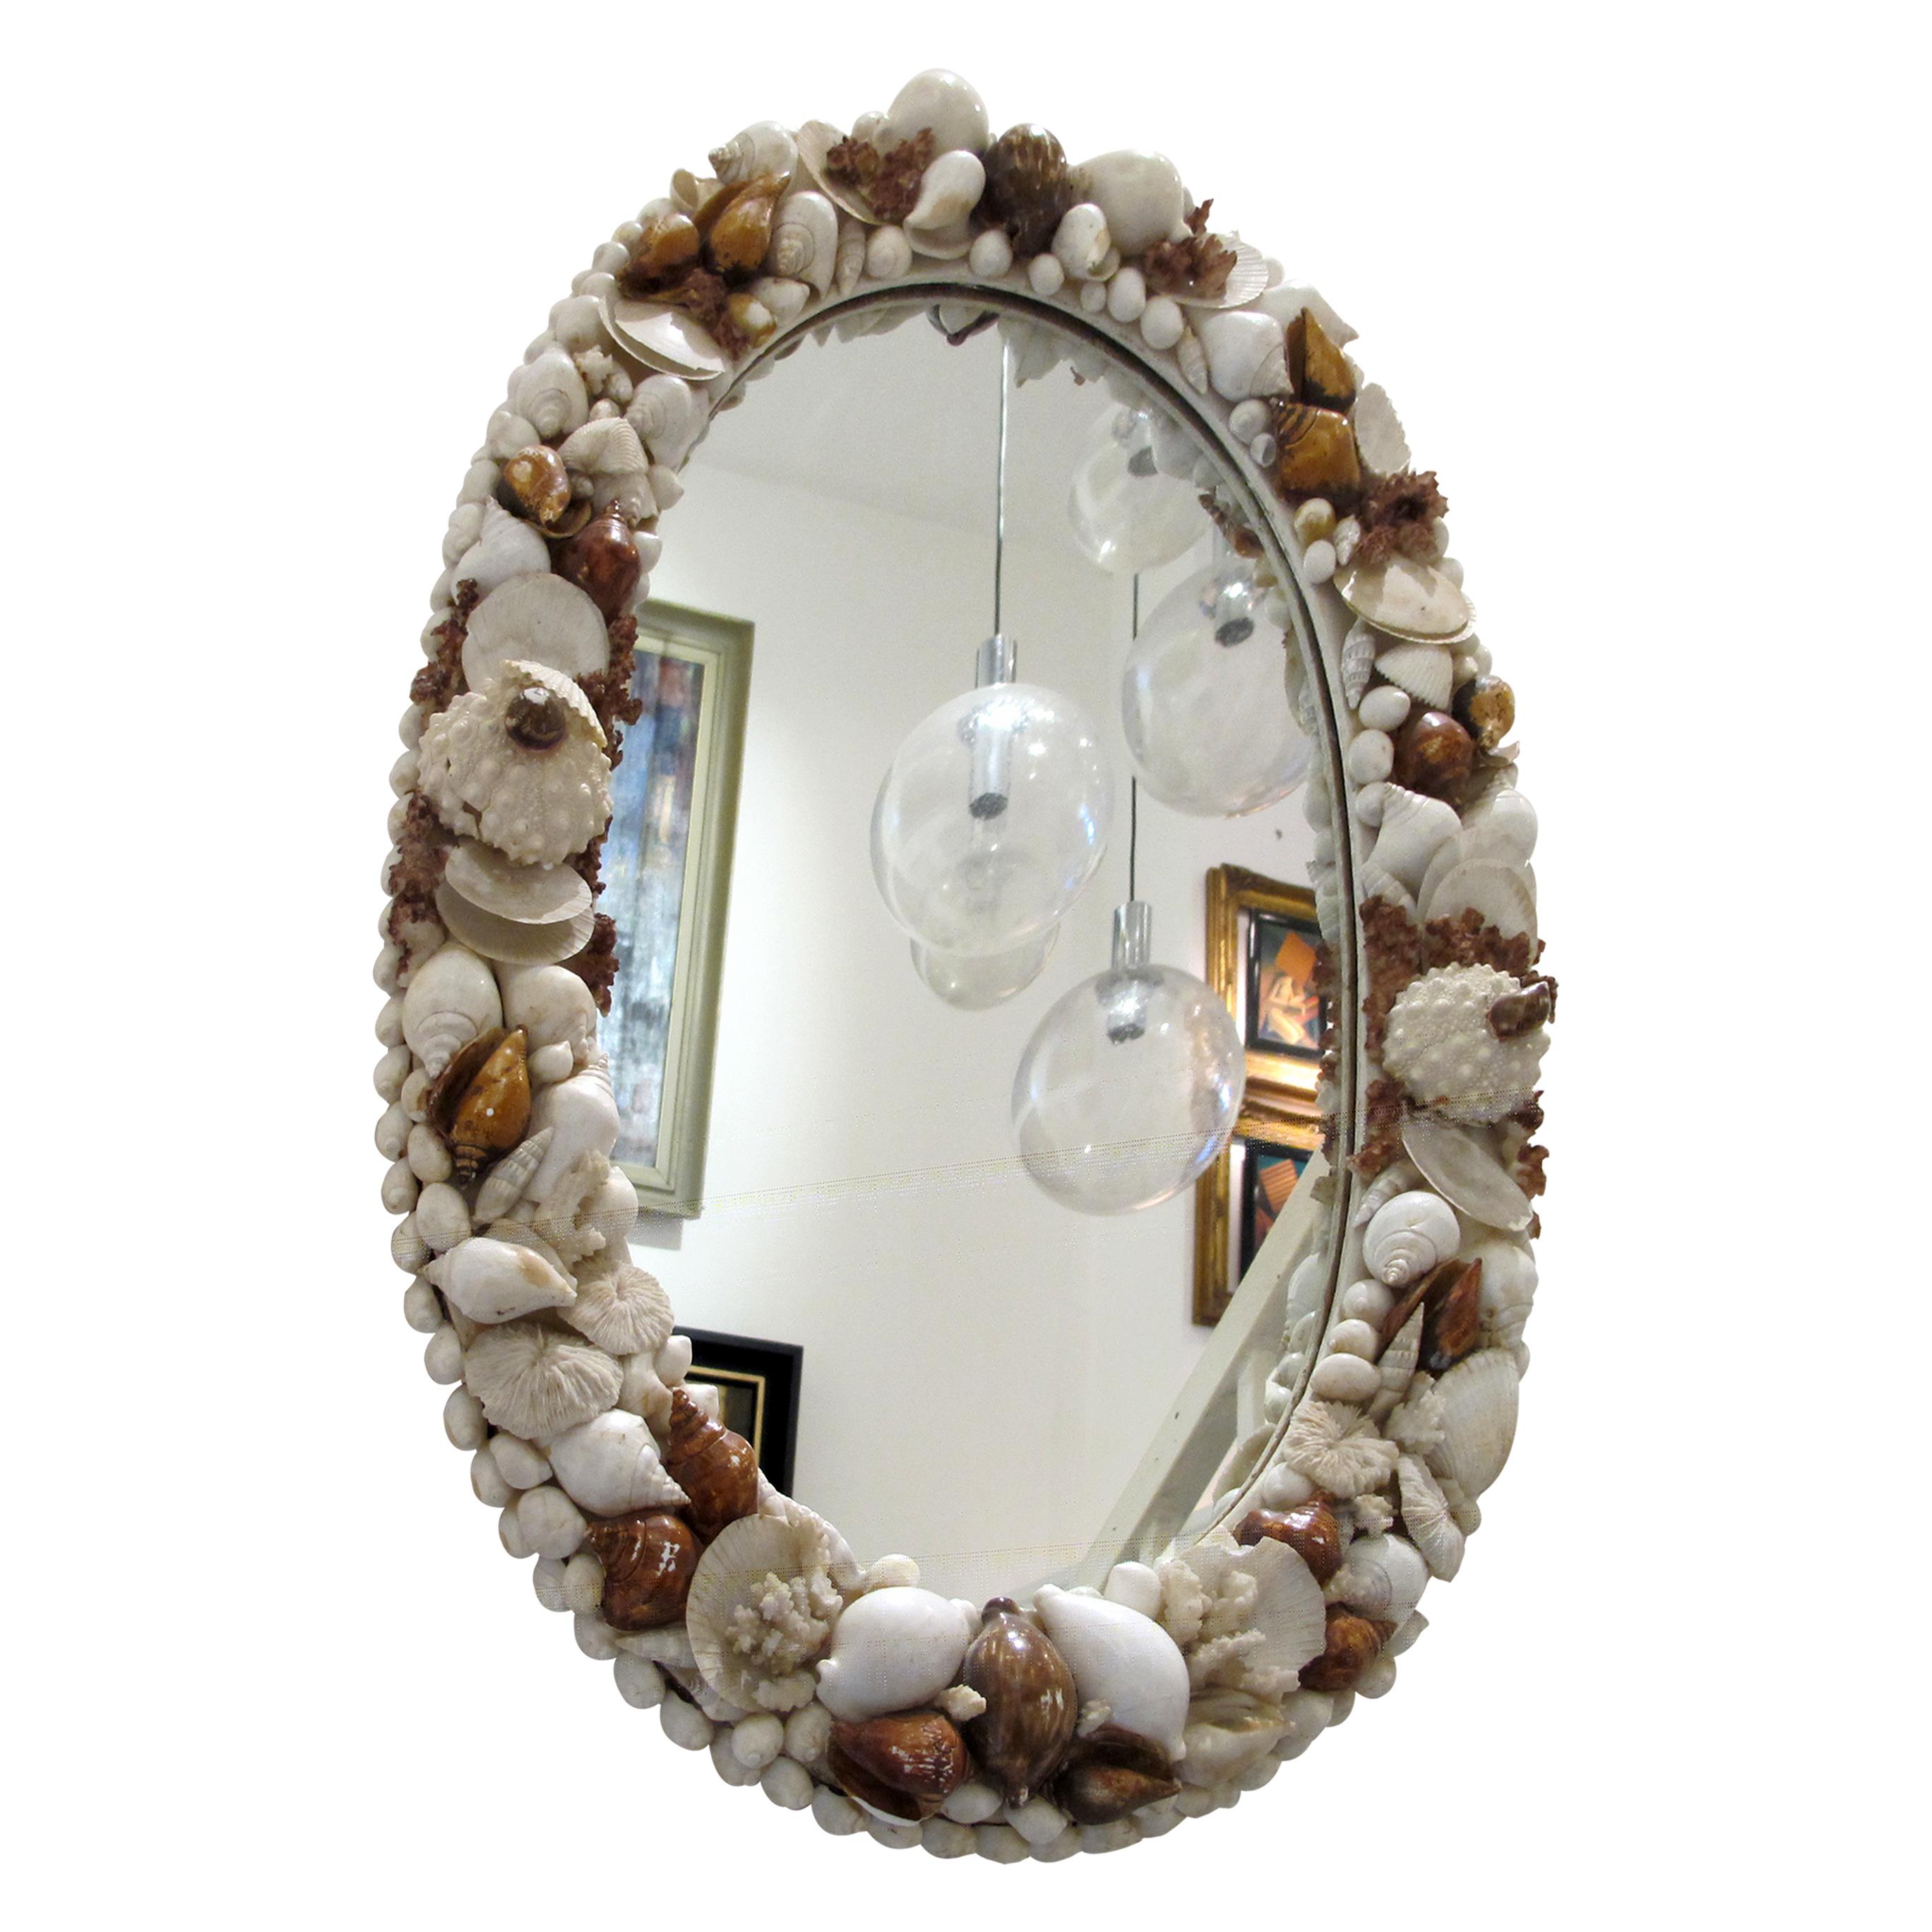 1960s Italian Oval Wall Mirror Encrusted with Sea Shells and Corals 1